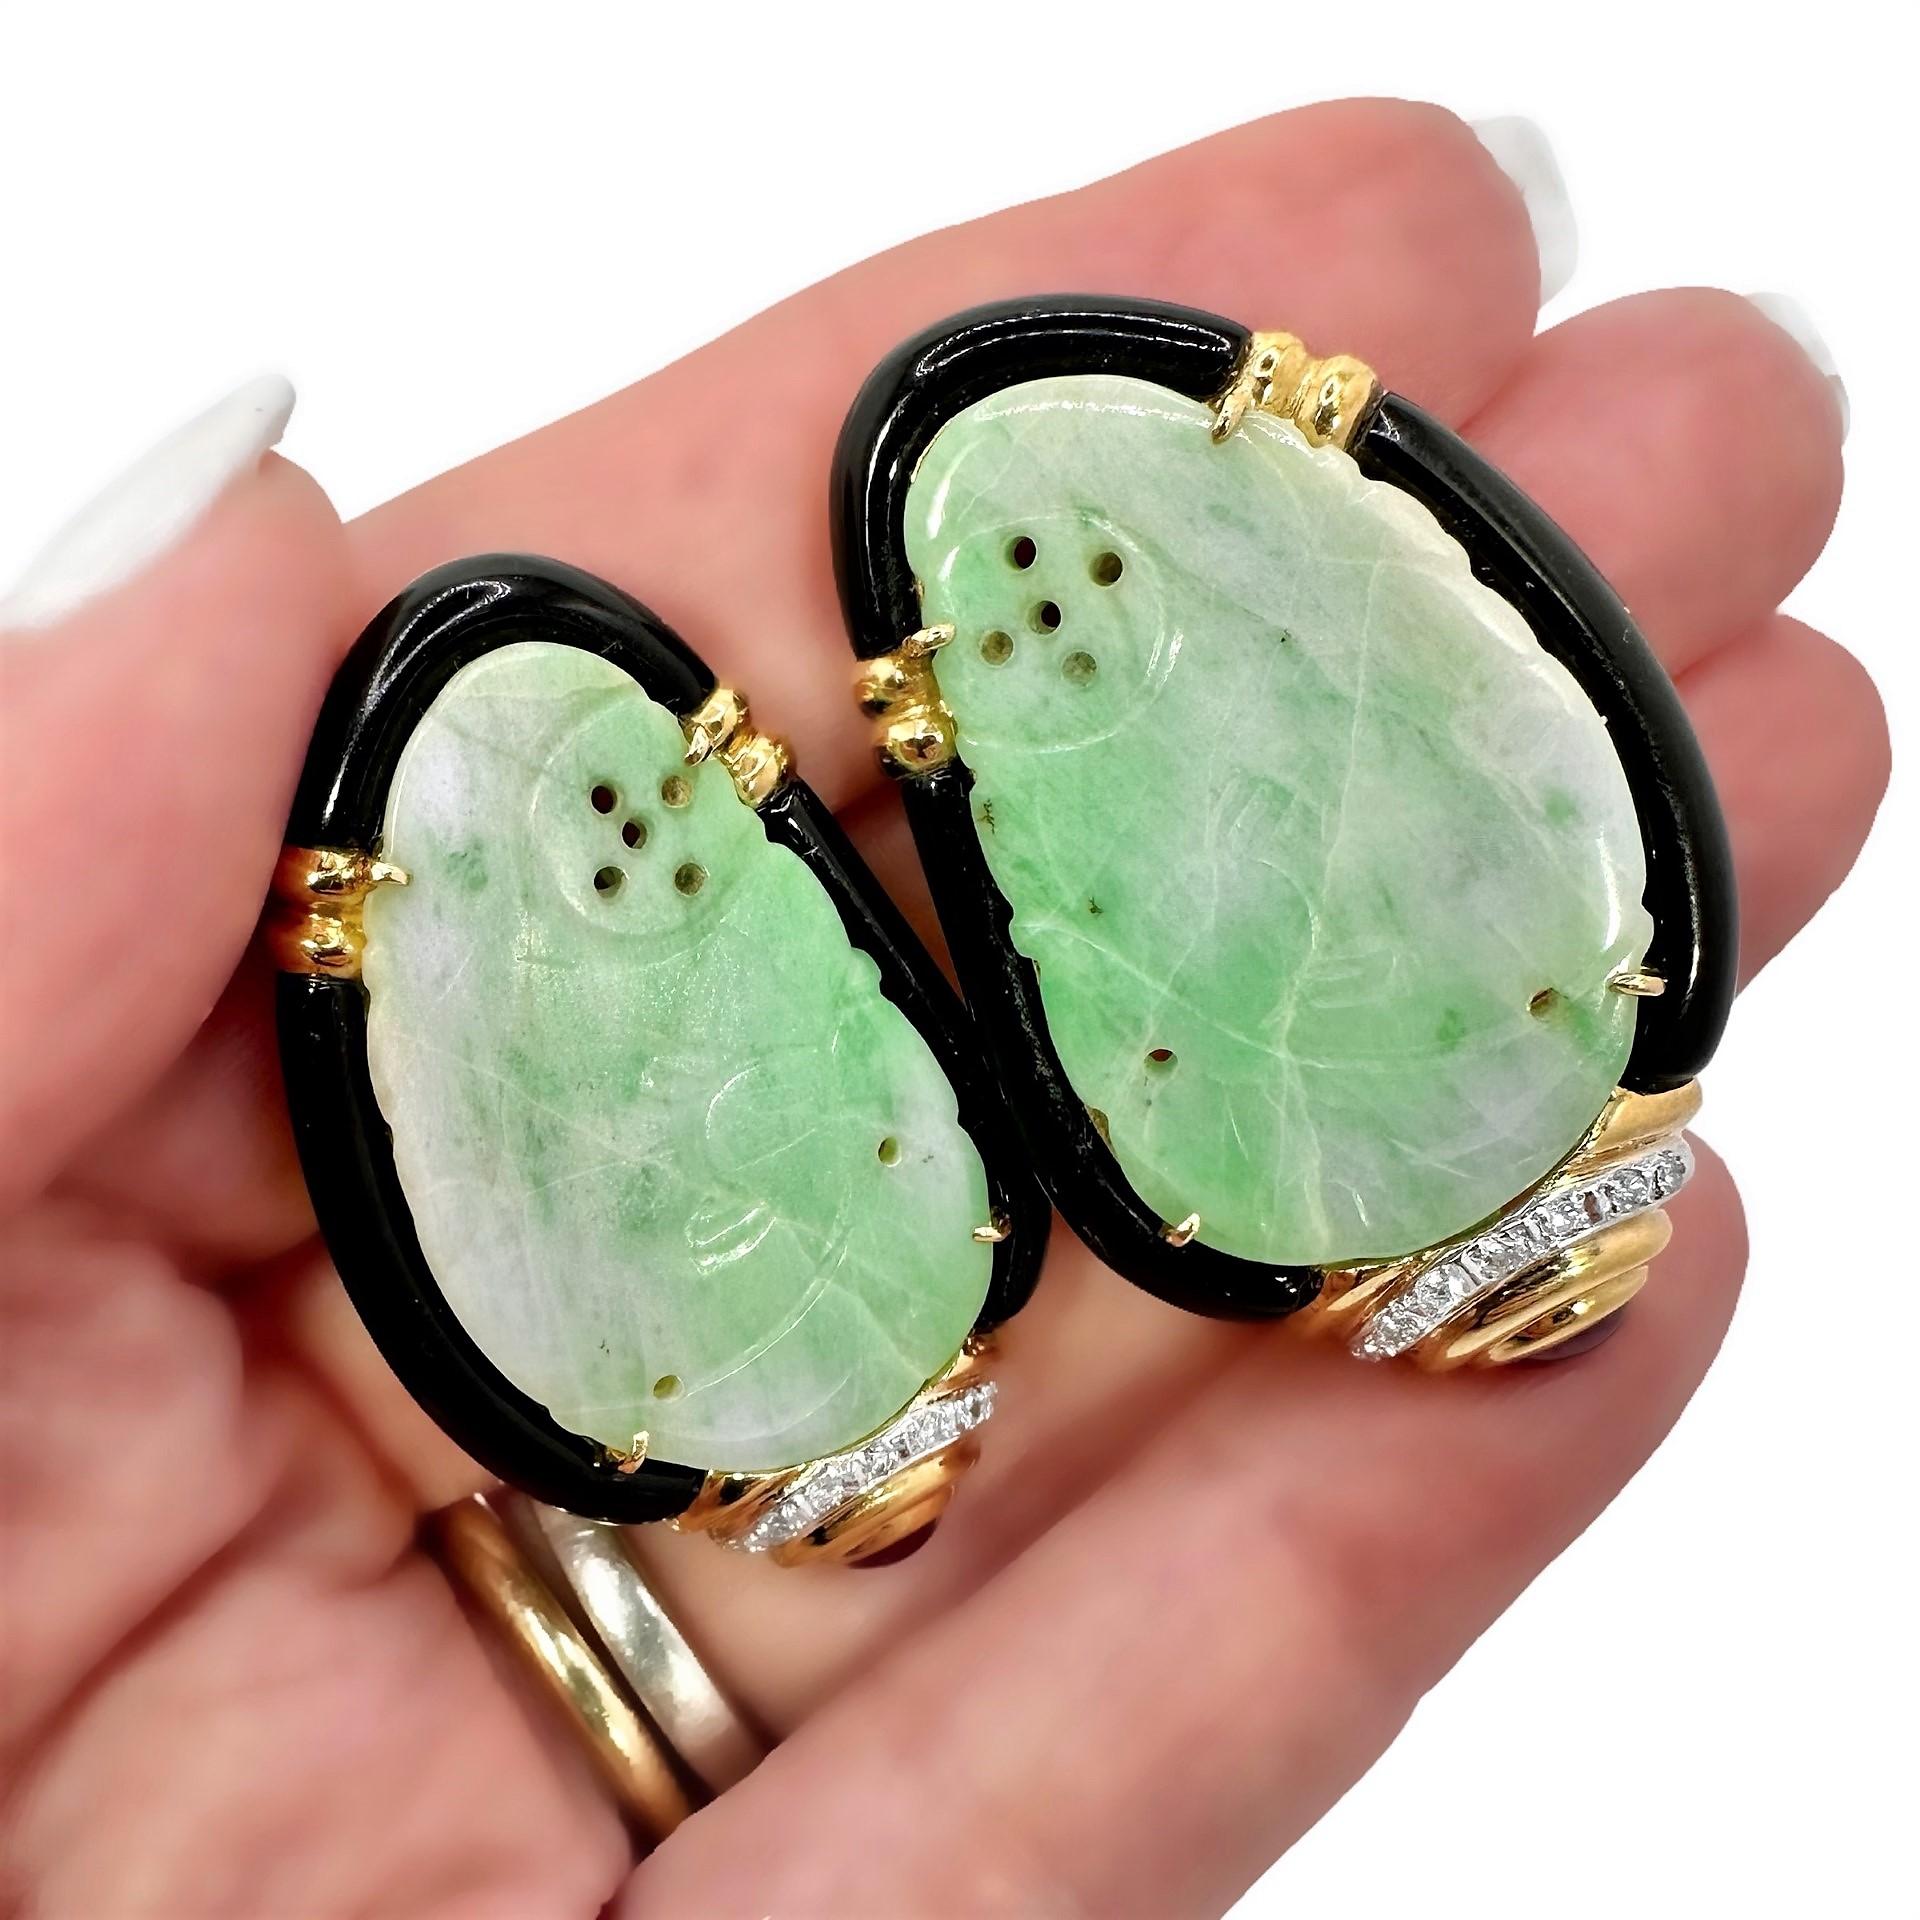 Grand Scale 18k Yellow Gold, Jadeite Jade, Ruby, Diamond and Onyx Earrings For Sale 1